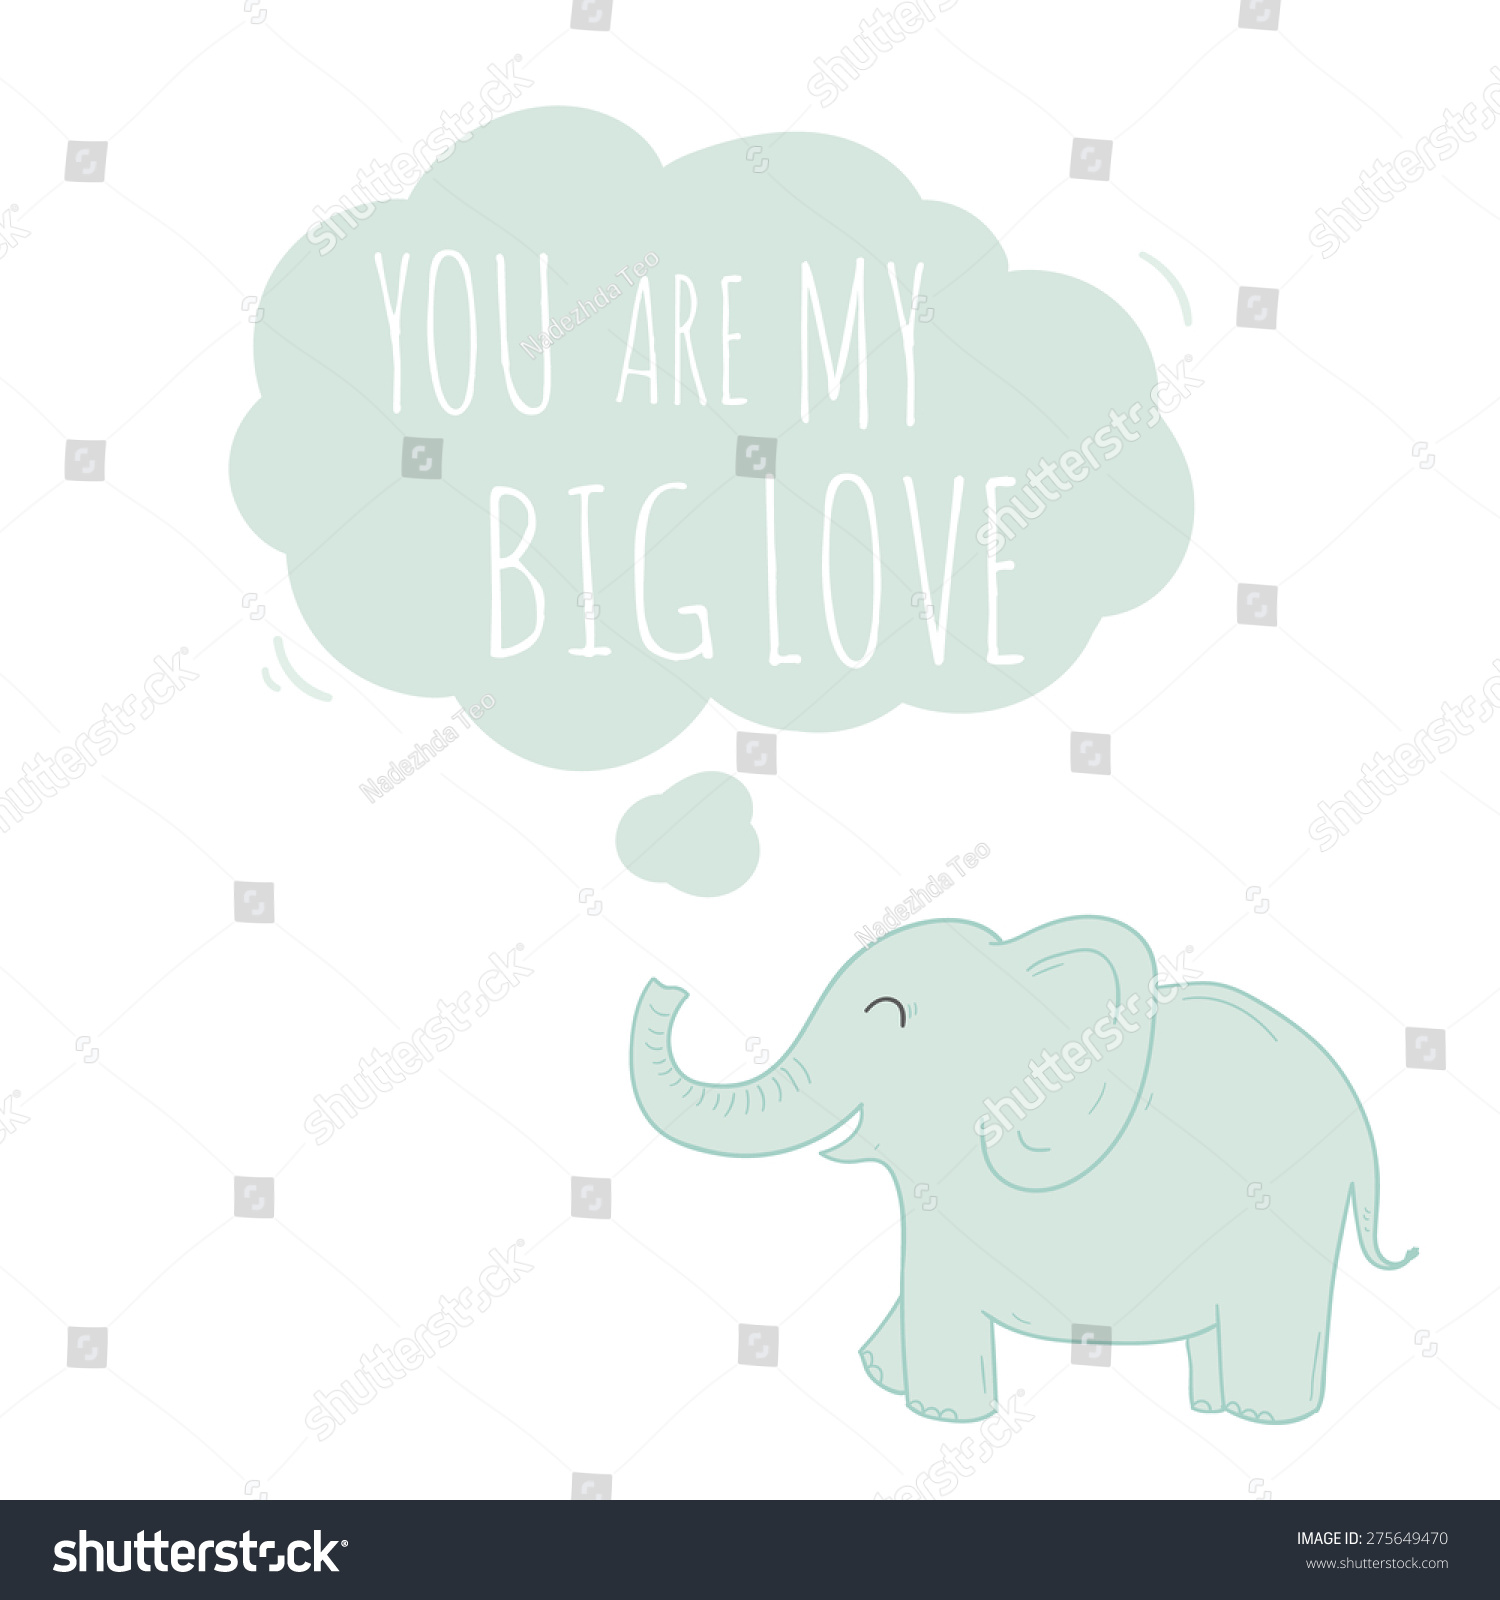 Inspirational romantic and love quote card Cute hand drawn elephant with text Vector illustration